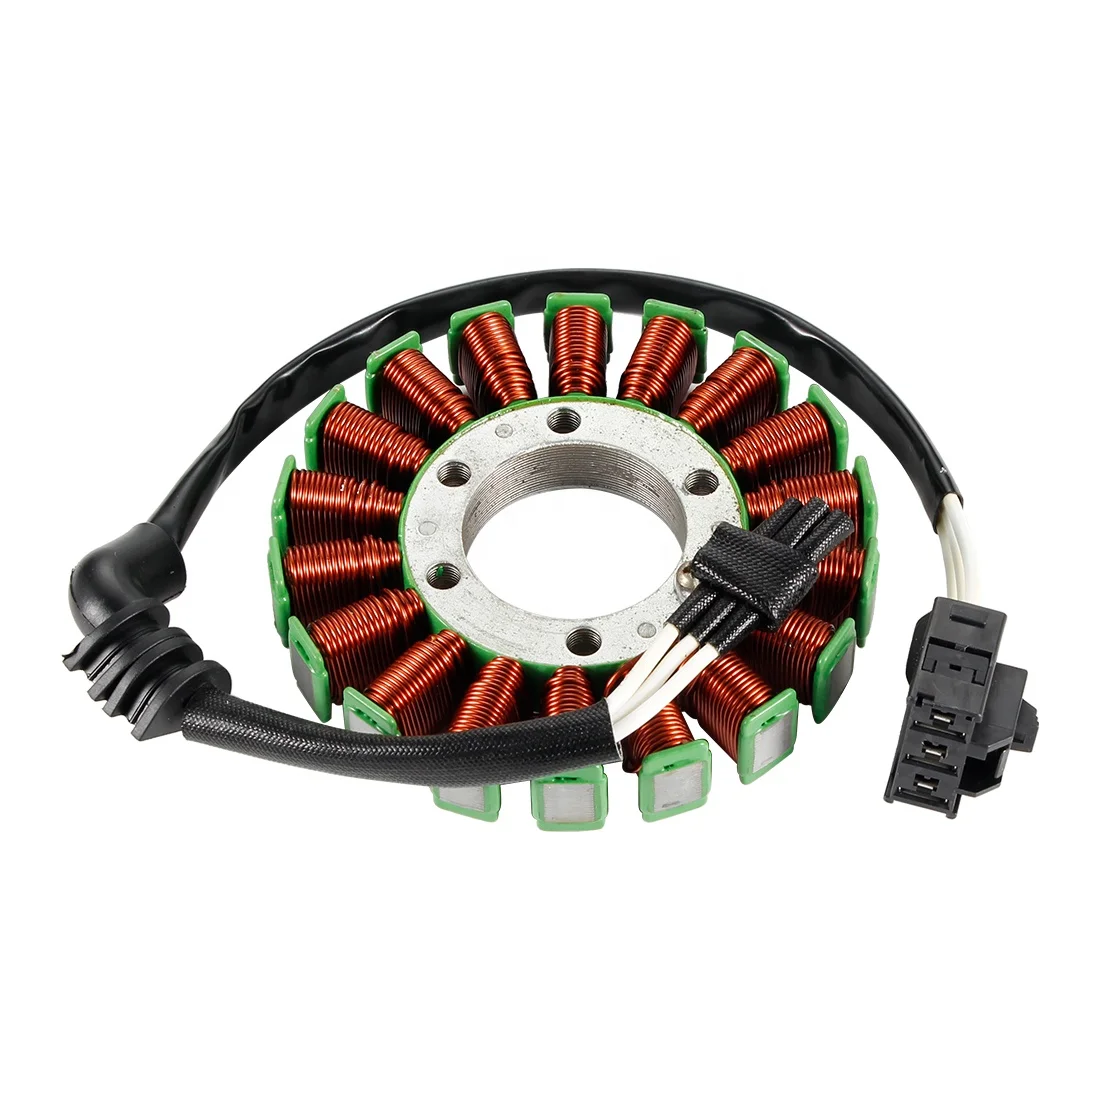 ZENITHIKE 2C0-81410-00-00 2C0-81410-01-00 Magneto Coil Stator Electric Stator Compatible with 2006-2016 Yamaha YZF R6 